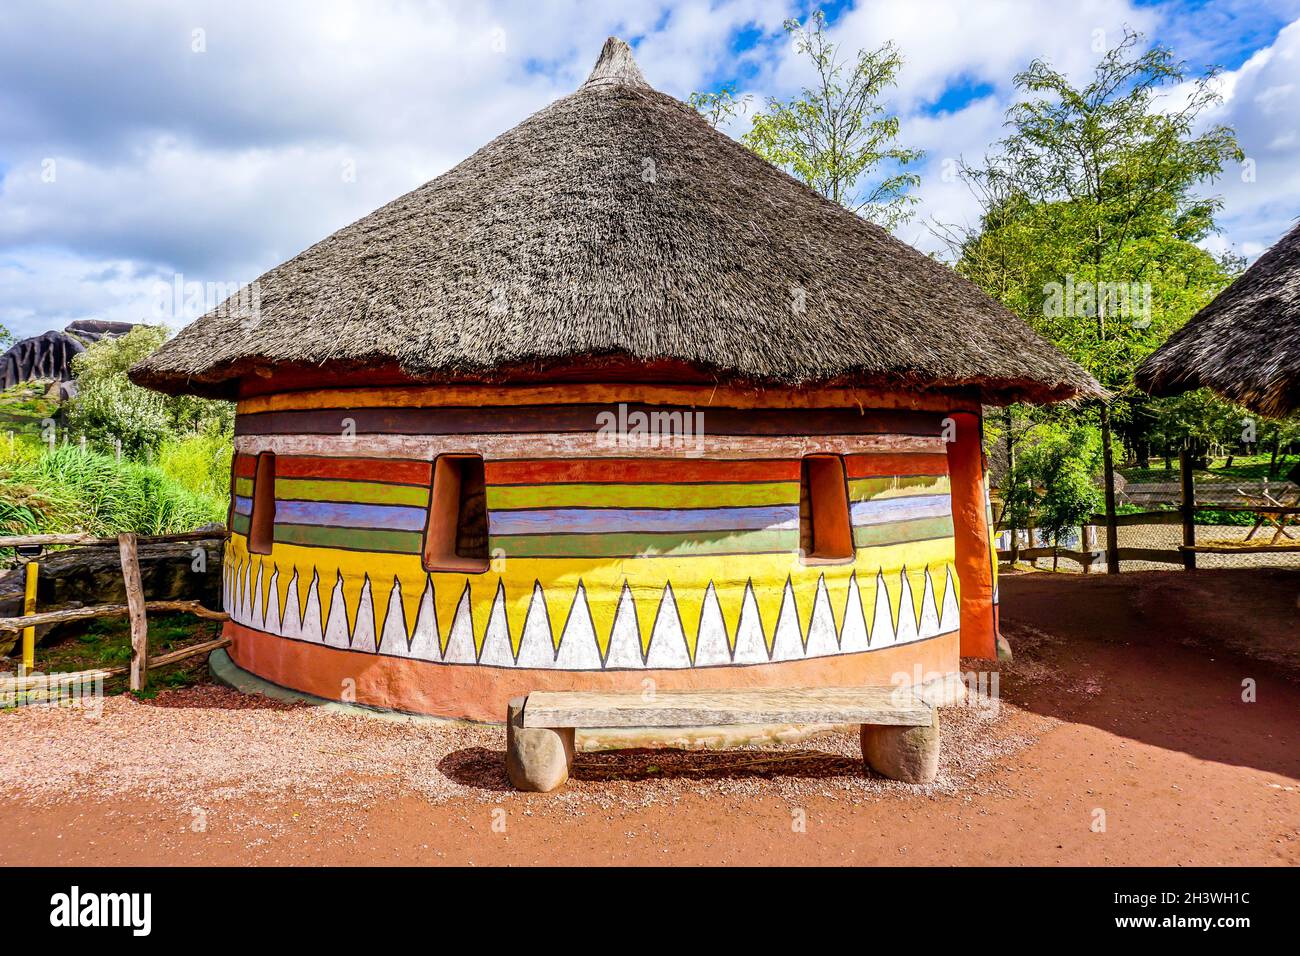 Traditional African house with multicolored painted walls and a bench in front of the house Stock Photo